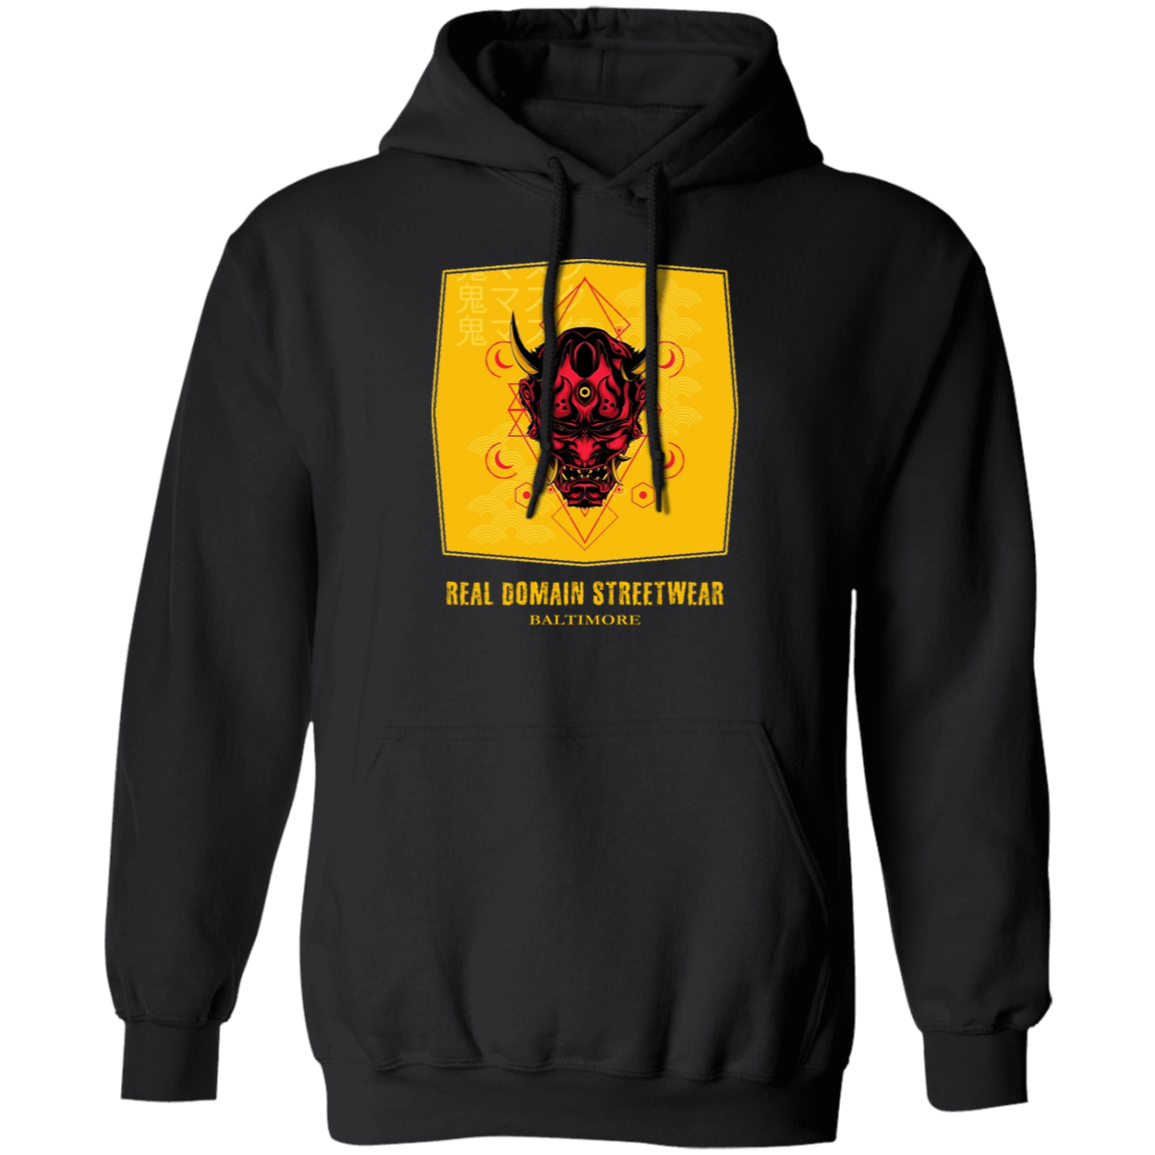 Real Domain Streetwear Hannya Mask Style Pullover Hoodie: Unleash Your Inner Gamer and Skater!